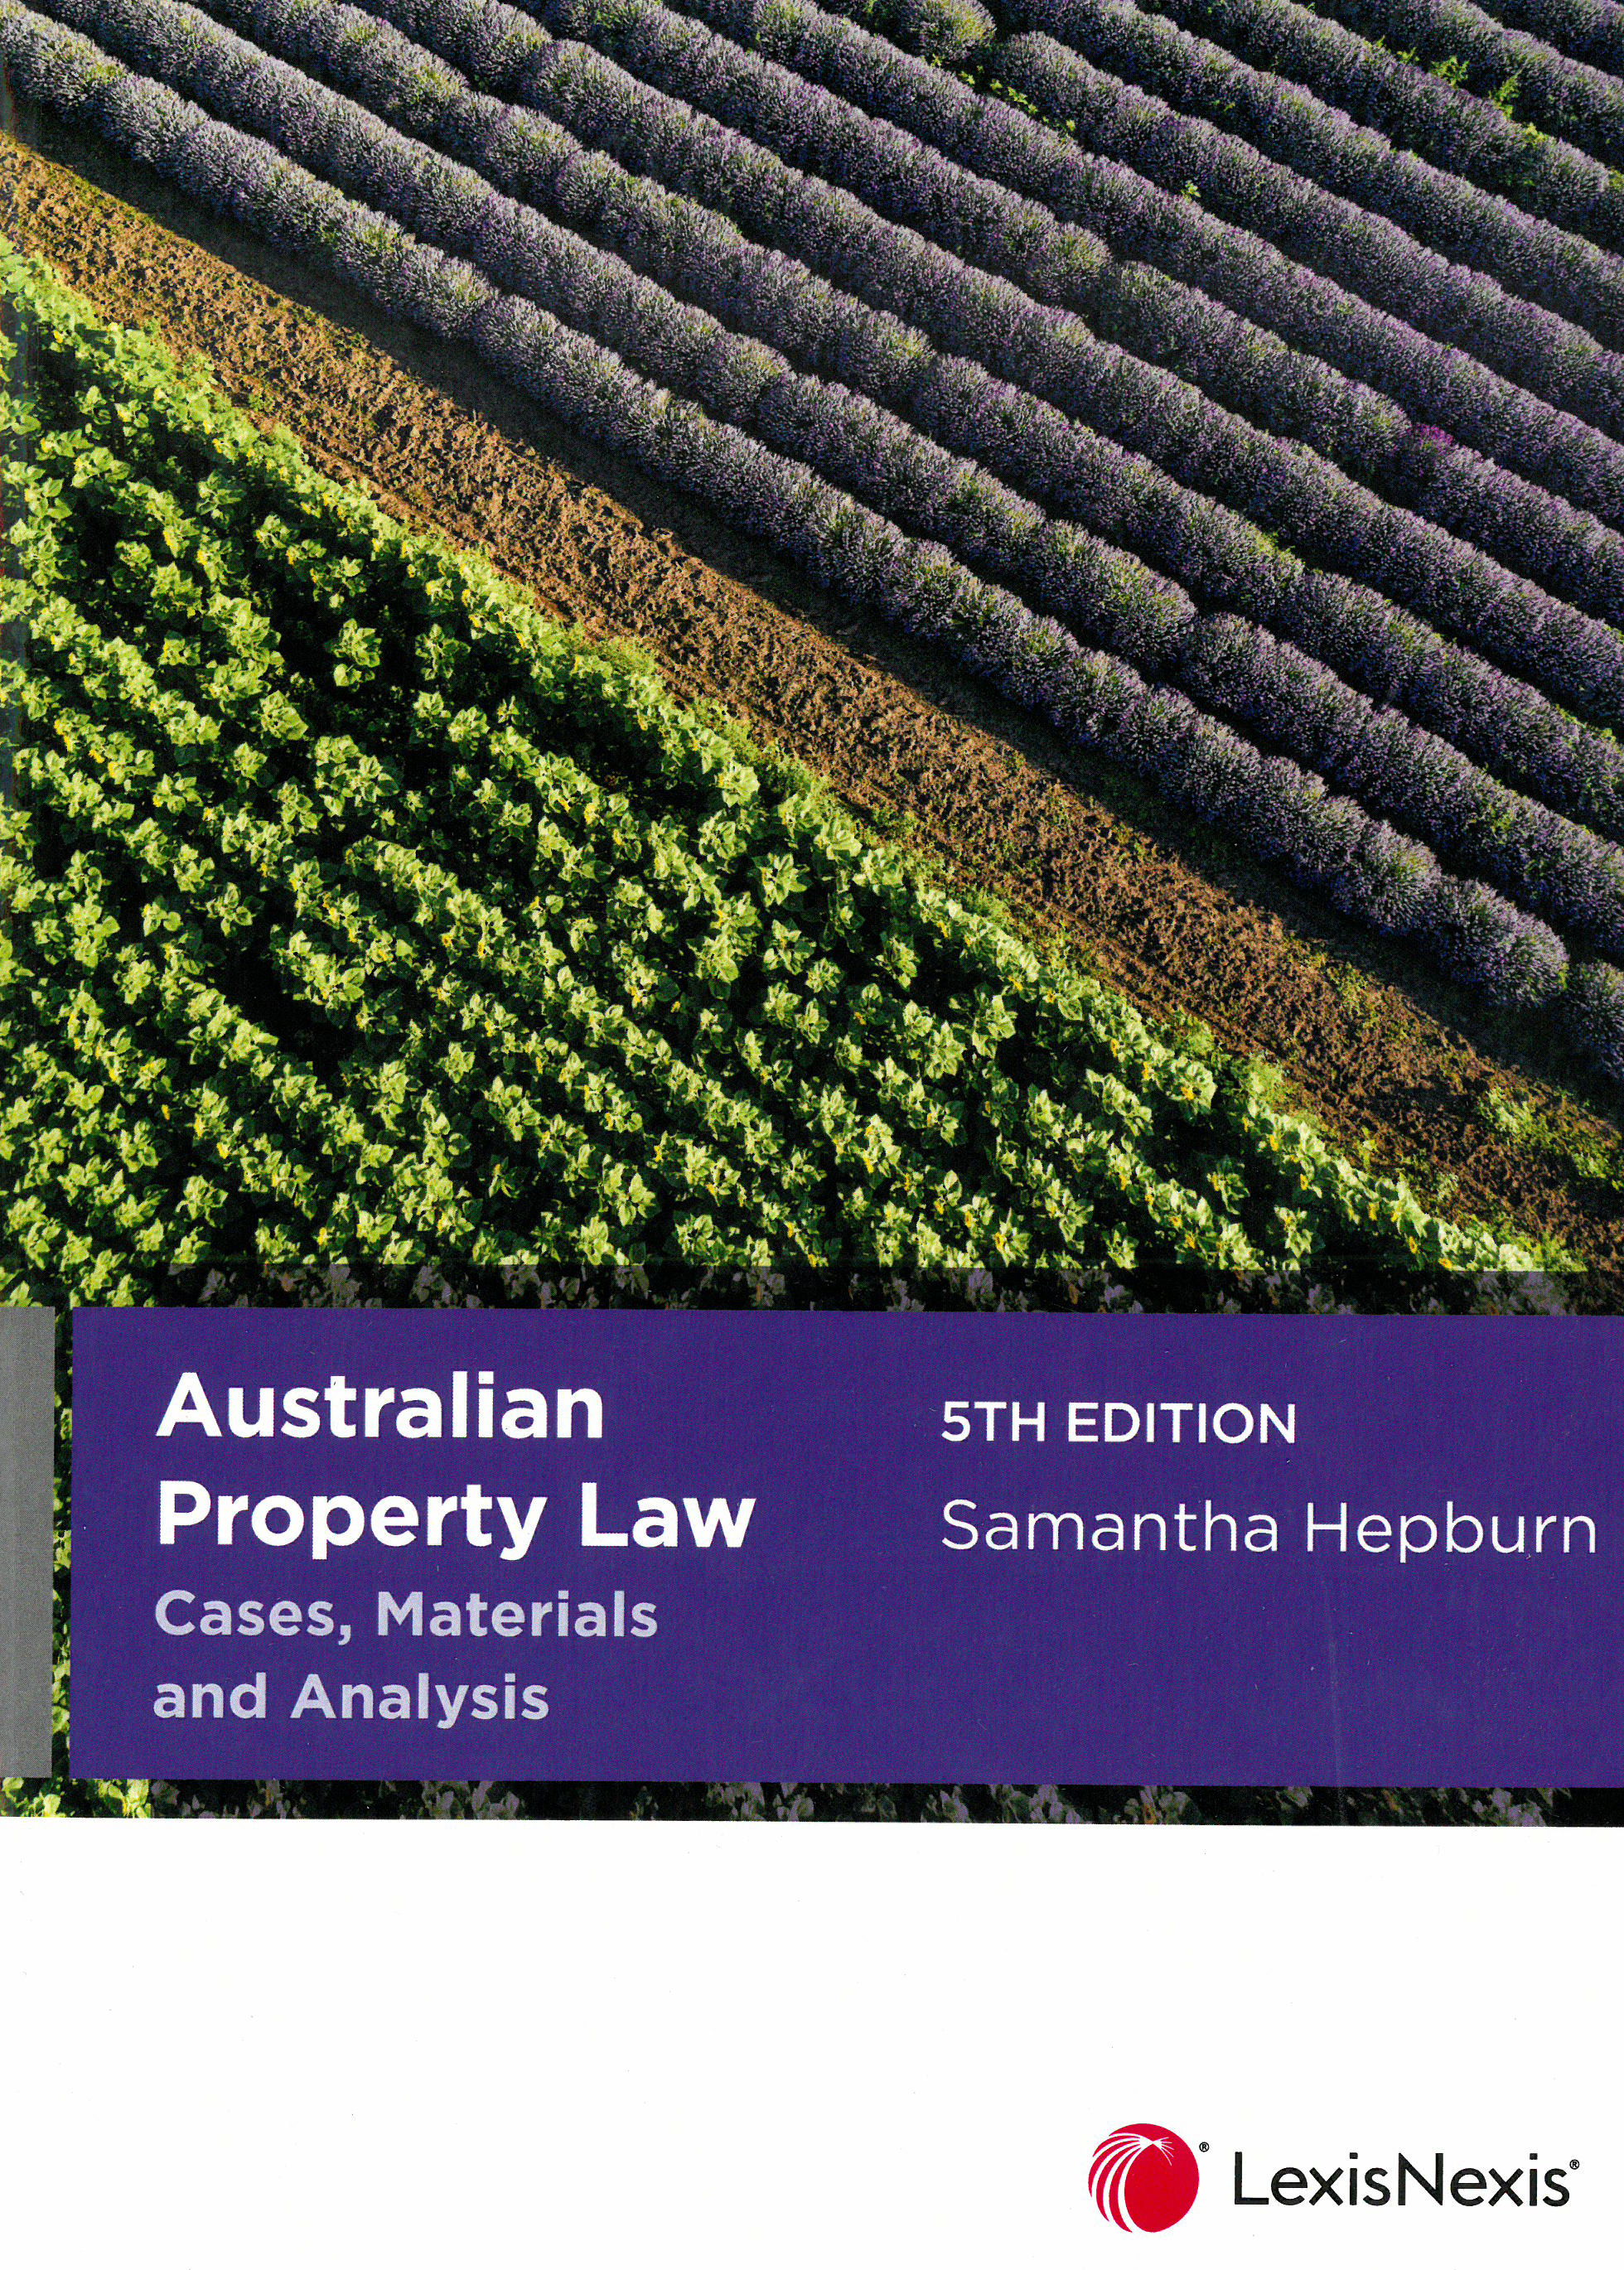 Australian Property Law: Cases, Materials and Analysis e5